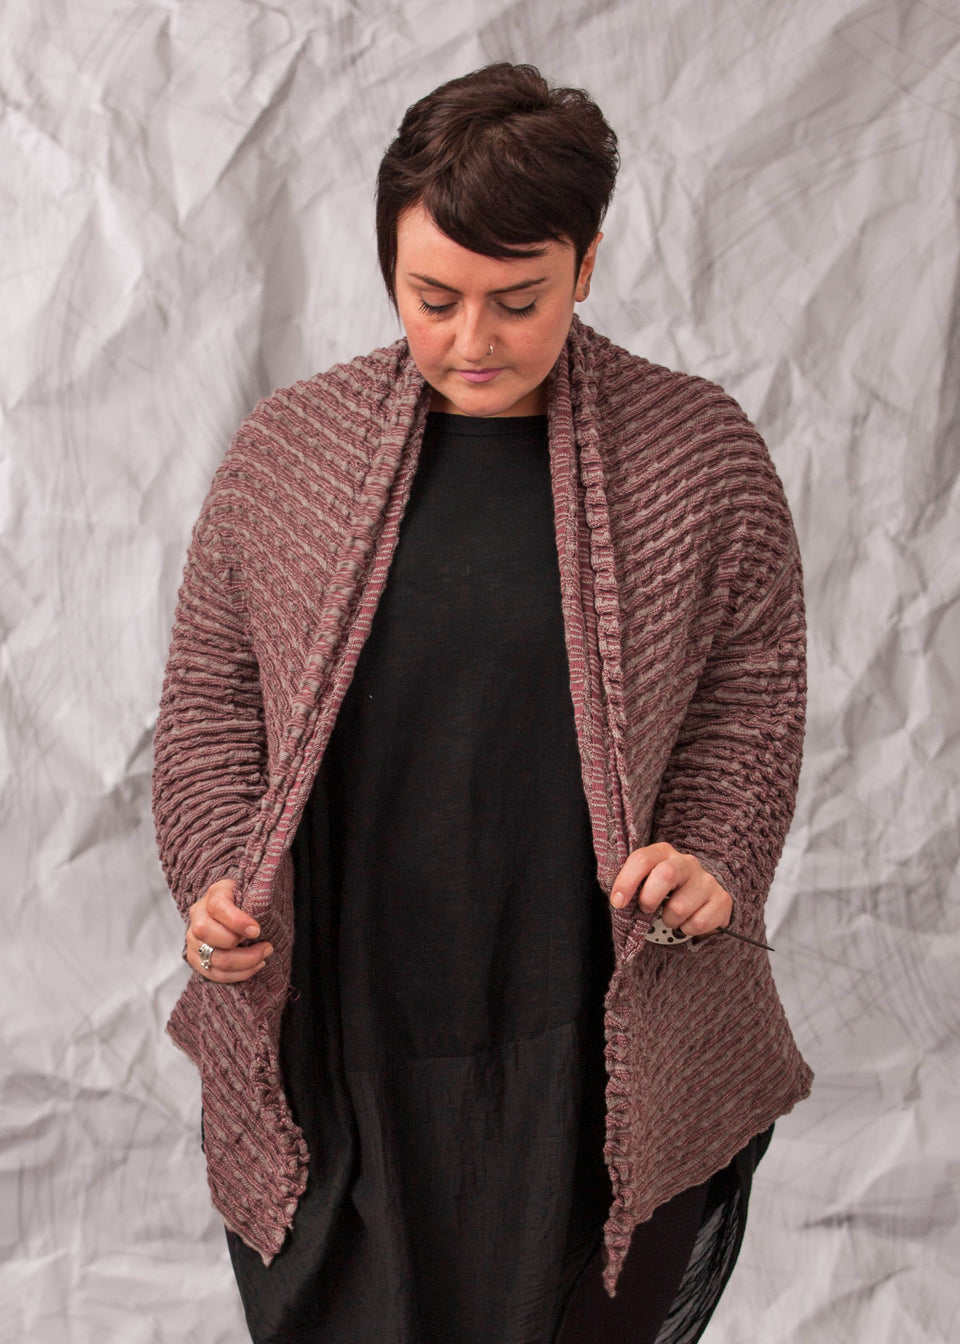 Model wears a longline knitted contemporary jacked in ridged fabric, in warm beige and cherry. Front view, holding the jacket slightly open.